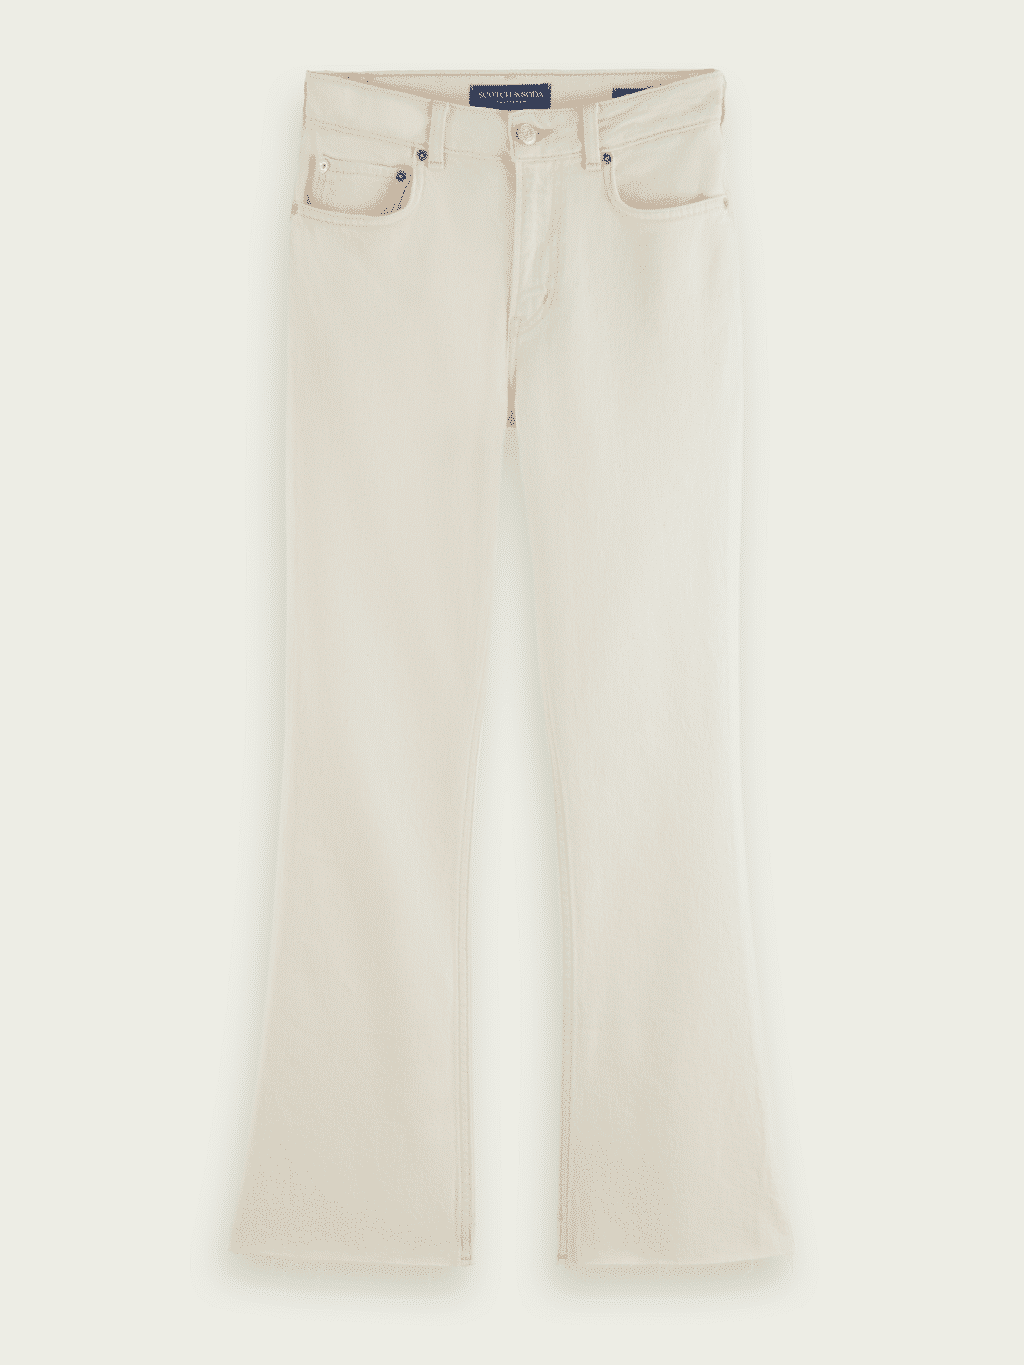 Spring summer 2022 SCOTCH & SODA THE KICK HIGH RISE CROPPED FLARE JEANS